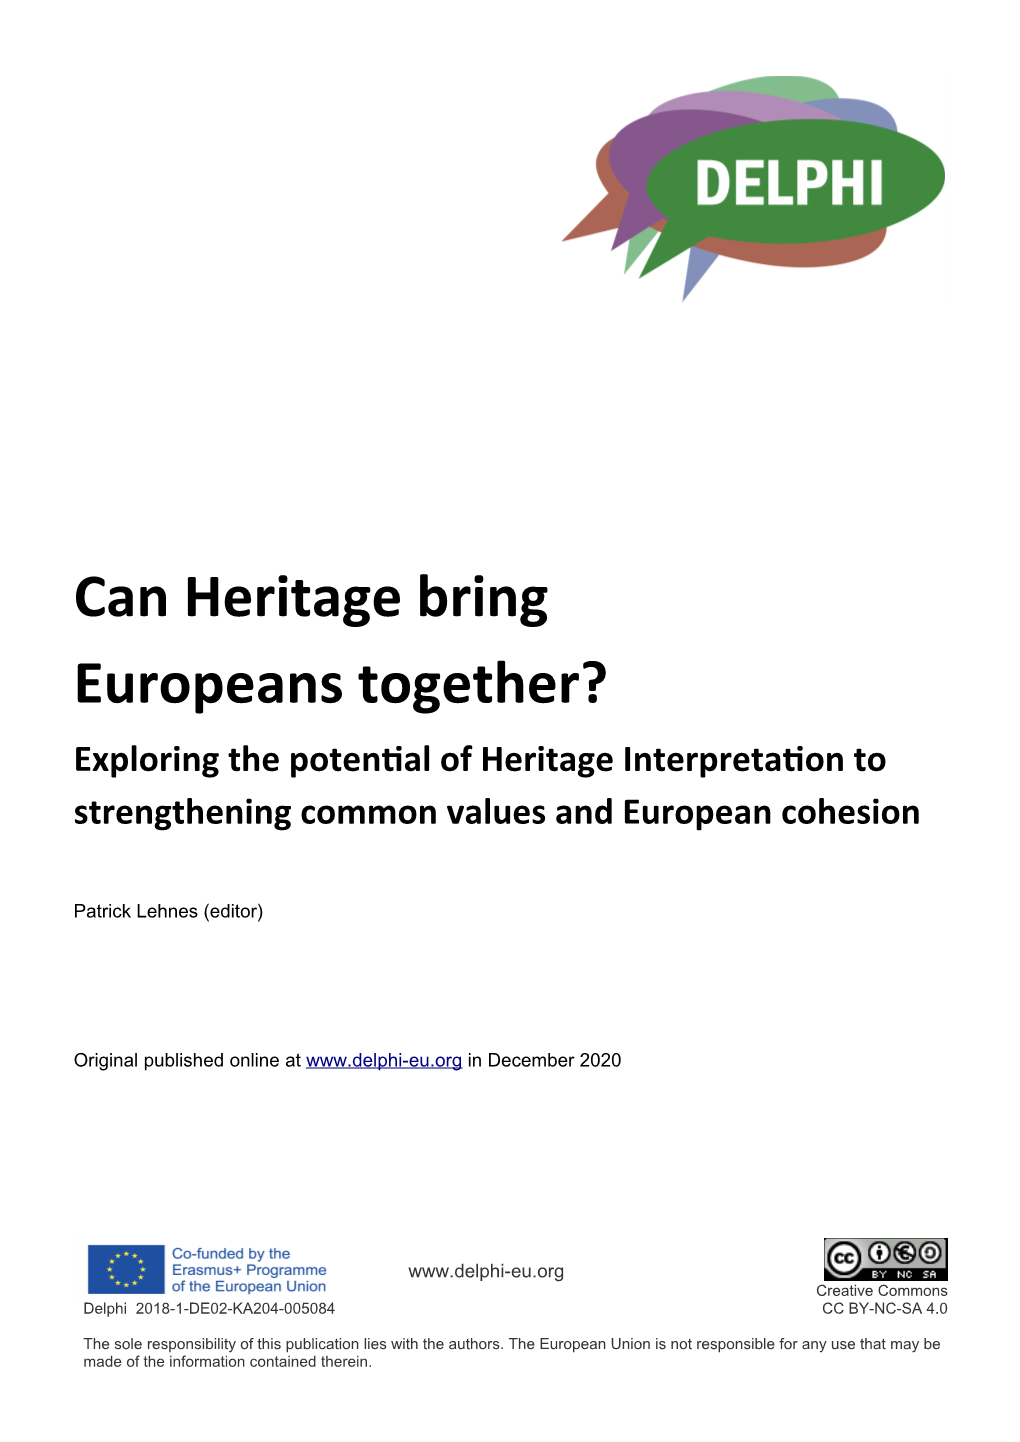 Can Heritage Bring Europeans Together? Exploring the Potential of Heritage Interpretation to Strengthening Common Values and European Cohesion